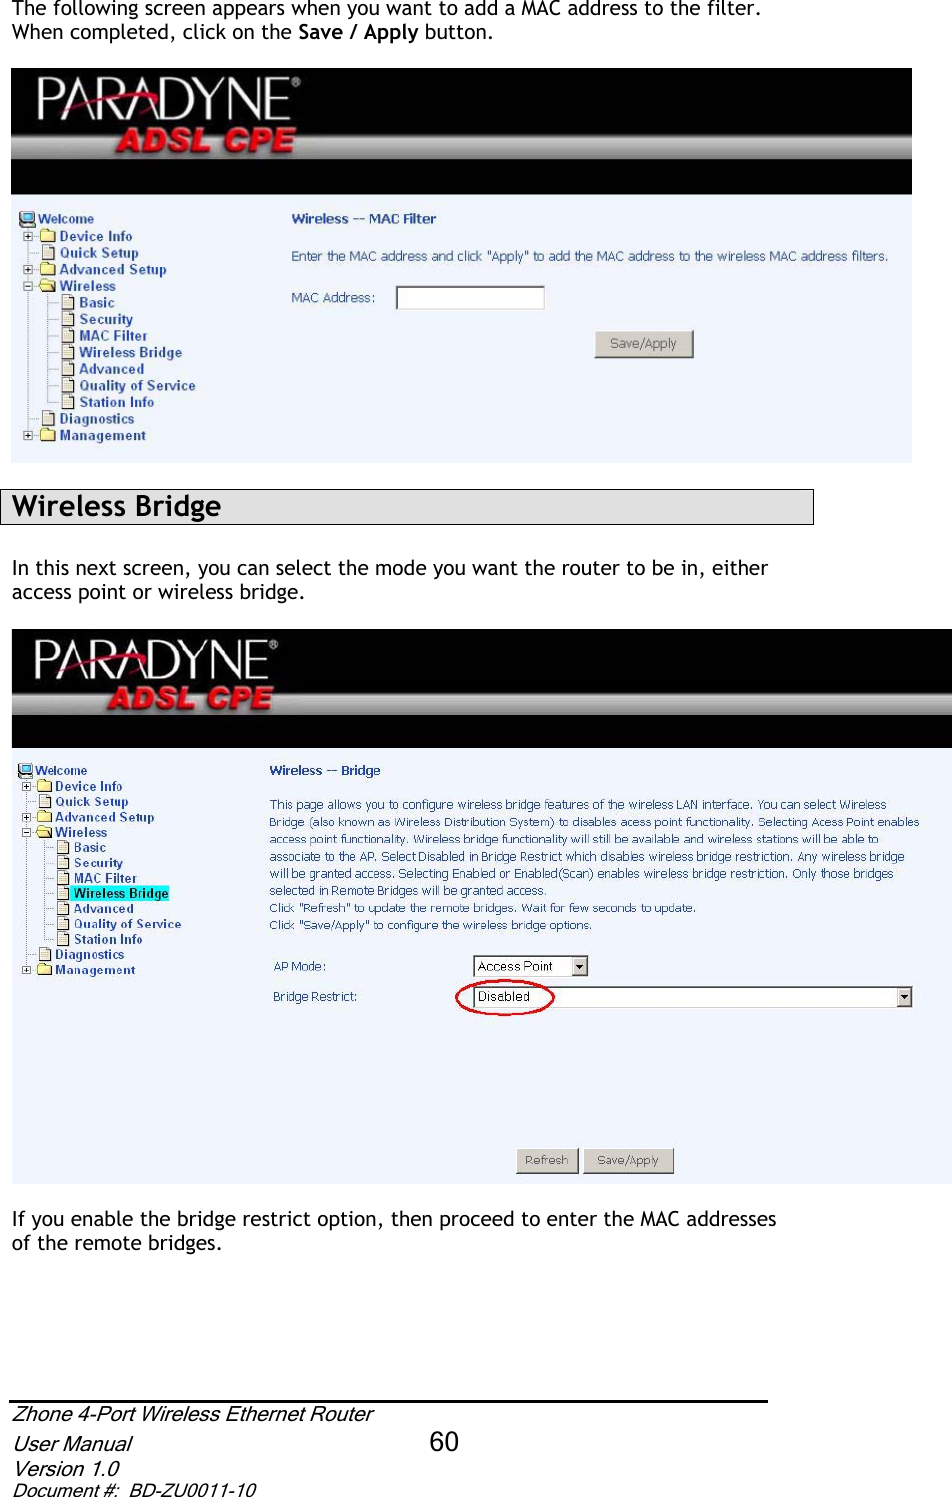 The following screen appears when you want to add a MAC address to the filter.  When completed, click on the Save / Apply button.Wireless Bridge In this next screen, you can select the mode you want the router to be in, either access point or wireless bridge. If you enable the bridge restrict option, then proceed to enter the MAC addresses of the remote bridges. Zhone 4-Port Wireless Ethernet Router User Manual 60Version 1.0 Document #:  BD-ZU0011-10